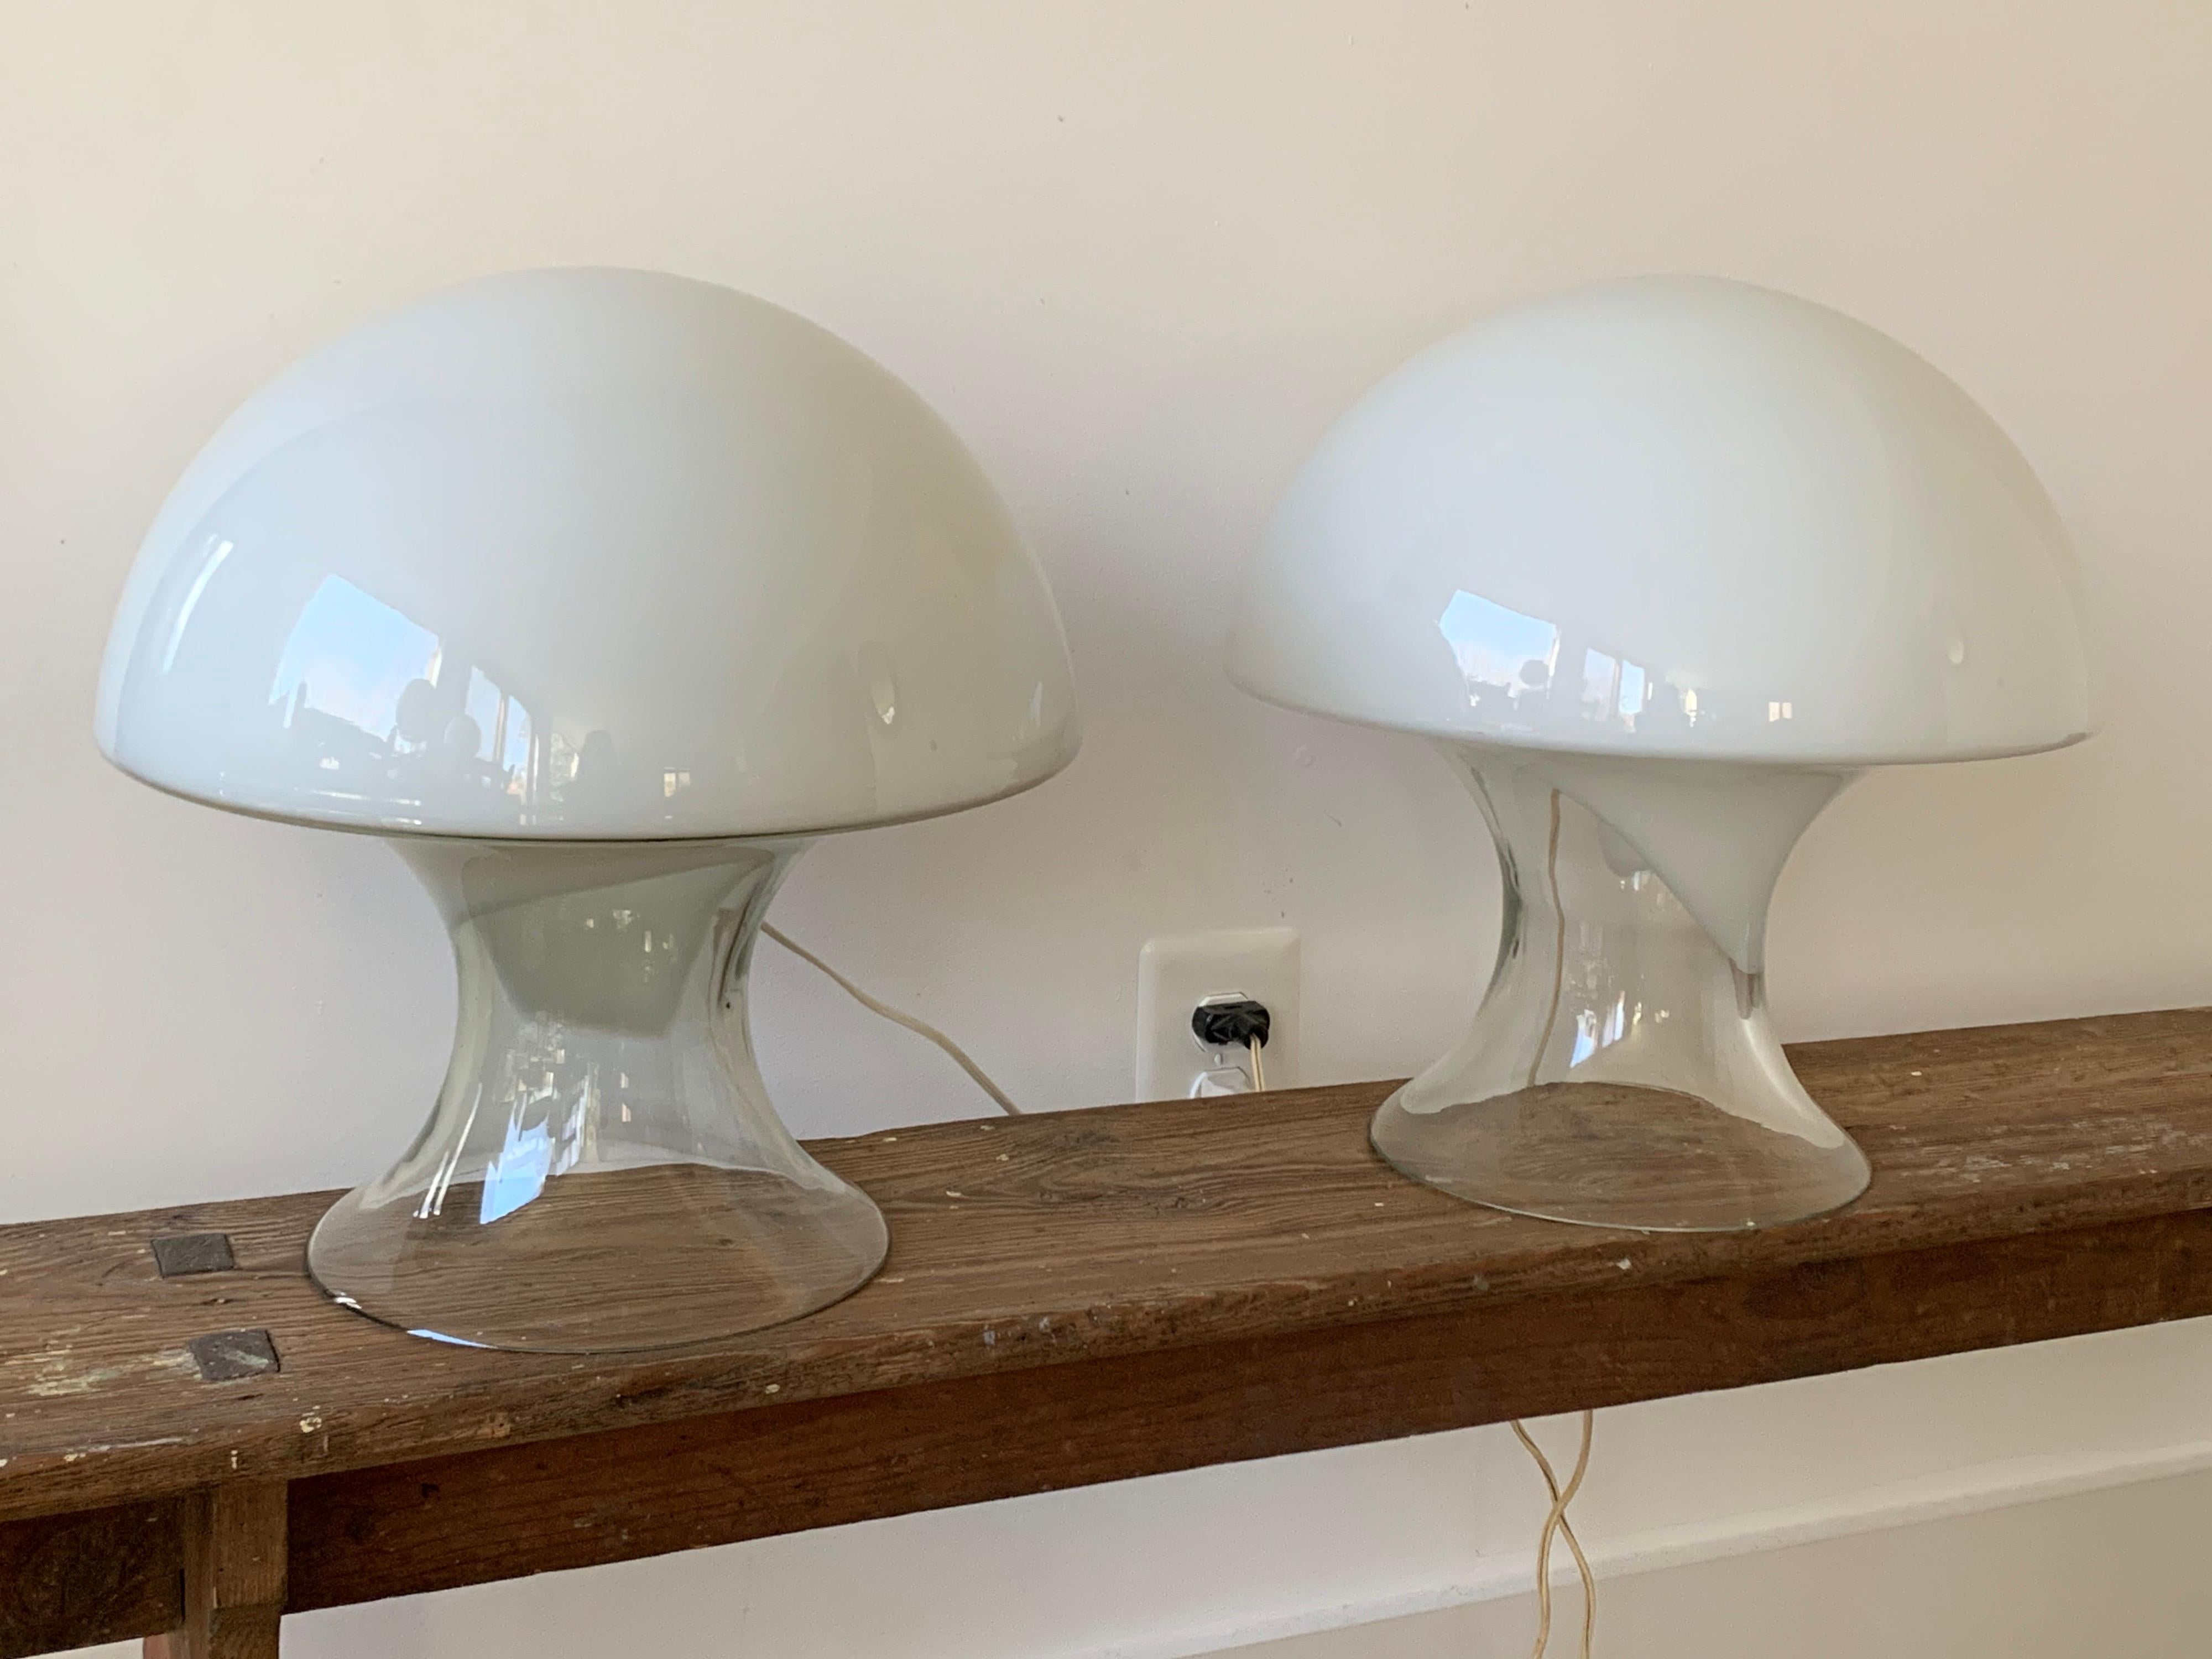 A pair of table lamps designed by Gino Vistosi, (1925-1980). Manufactured in Murano in the 1960s.
Clean glass with a white glass layer, as if a handkerchief were draped over the form. Each one is different, individual. Mushroom shaped.